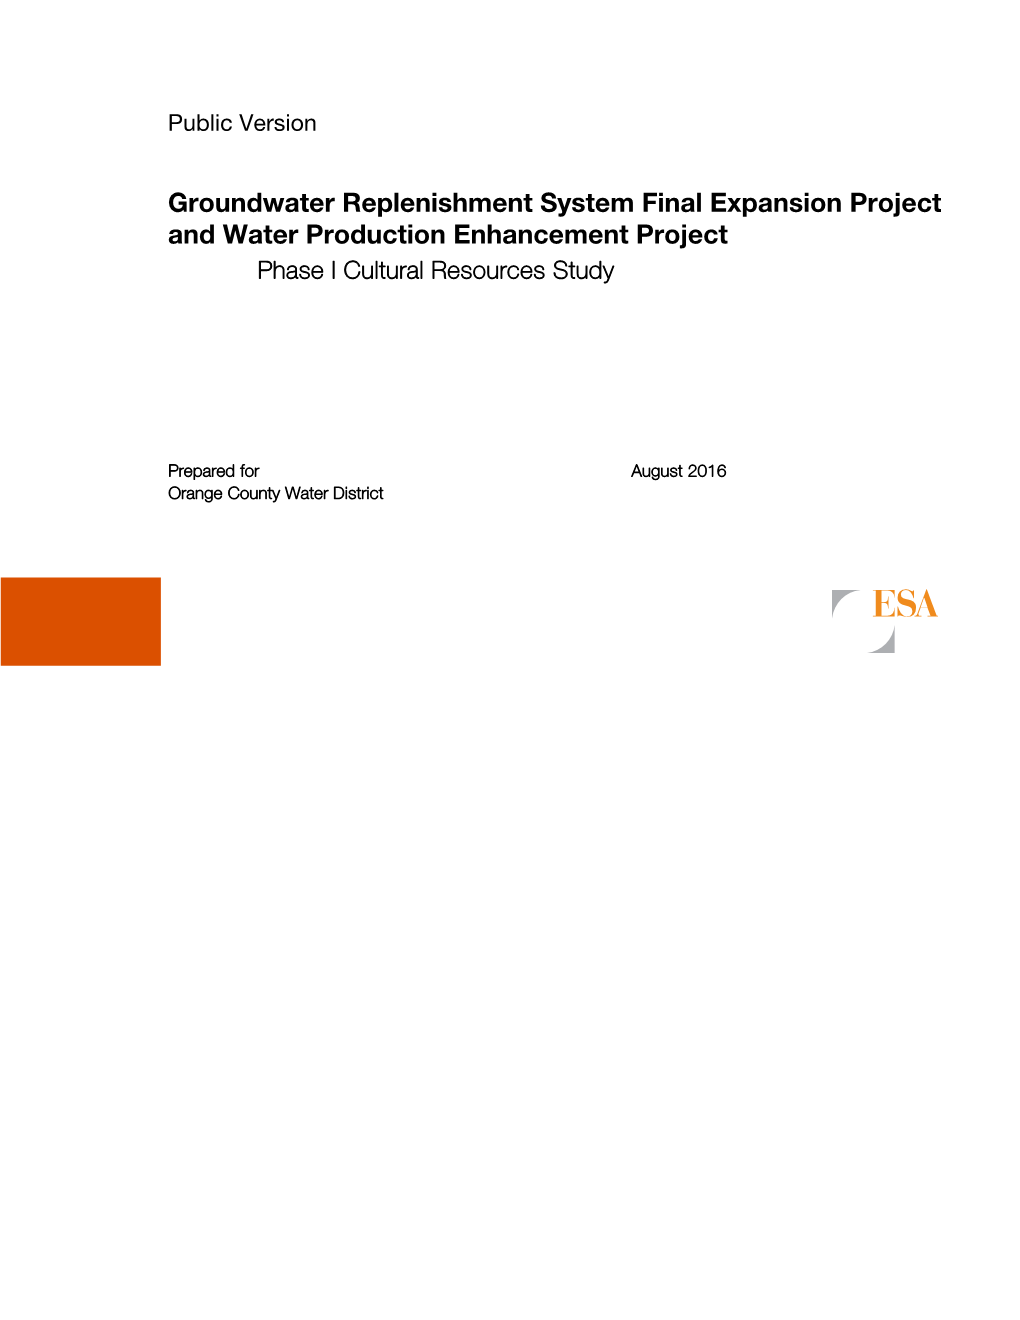 Groundwater Replenishment System Final Expansion Project and Water Production Enhancement Project Phase I Cultural Resources Study